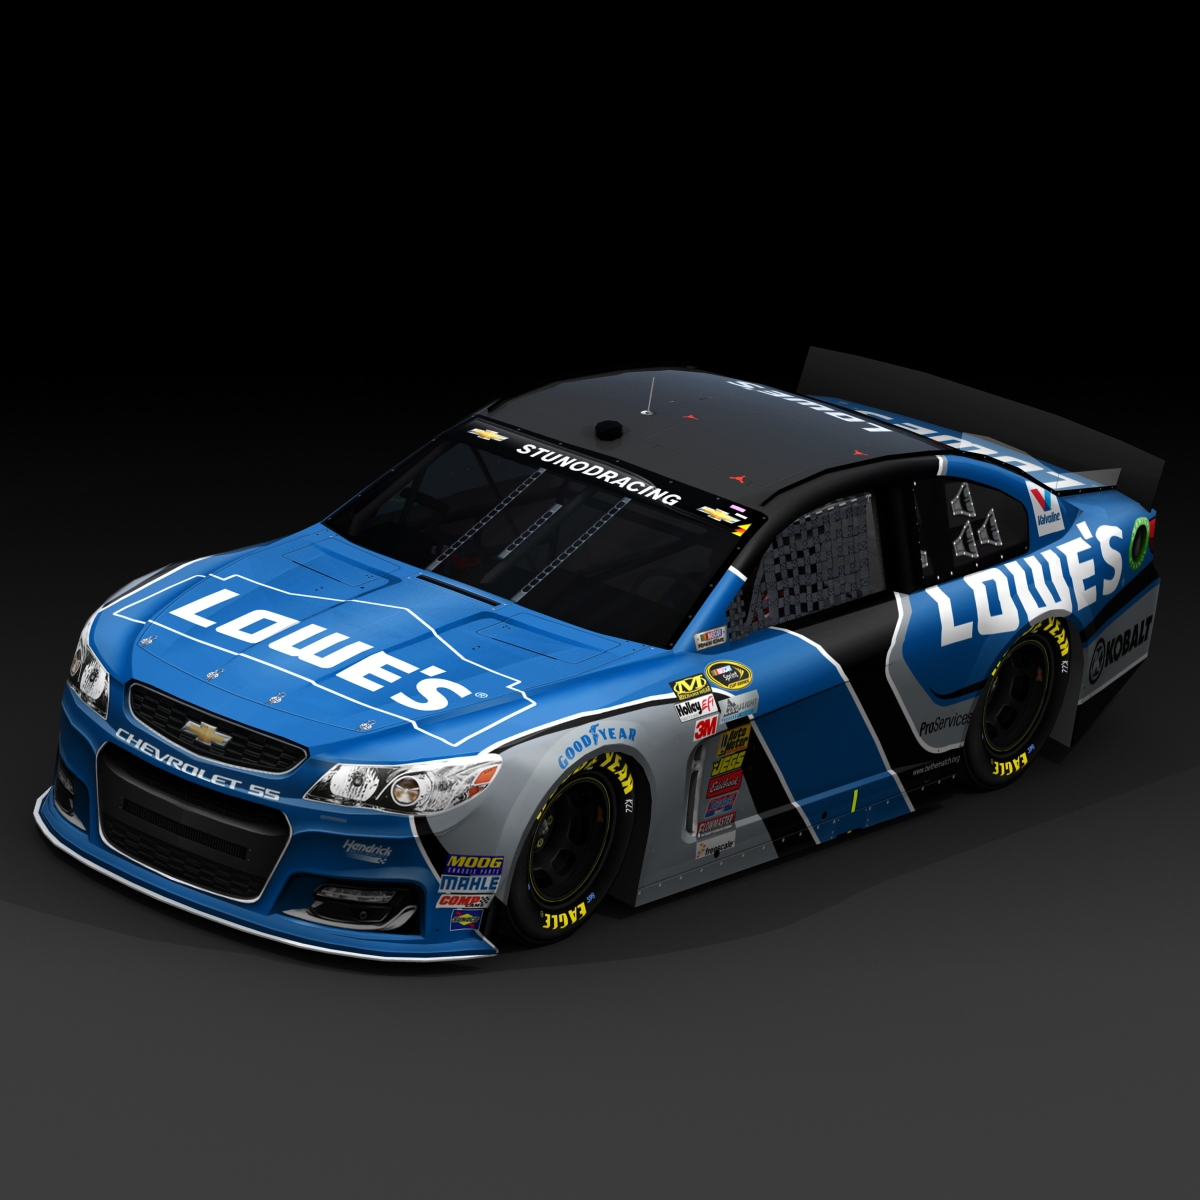 Jimmie_Johnson_Lowes_Never_Made_It_To_Track-Render-NO.jpg